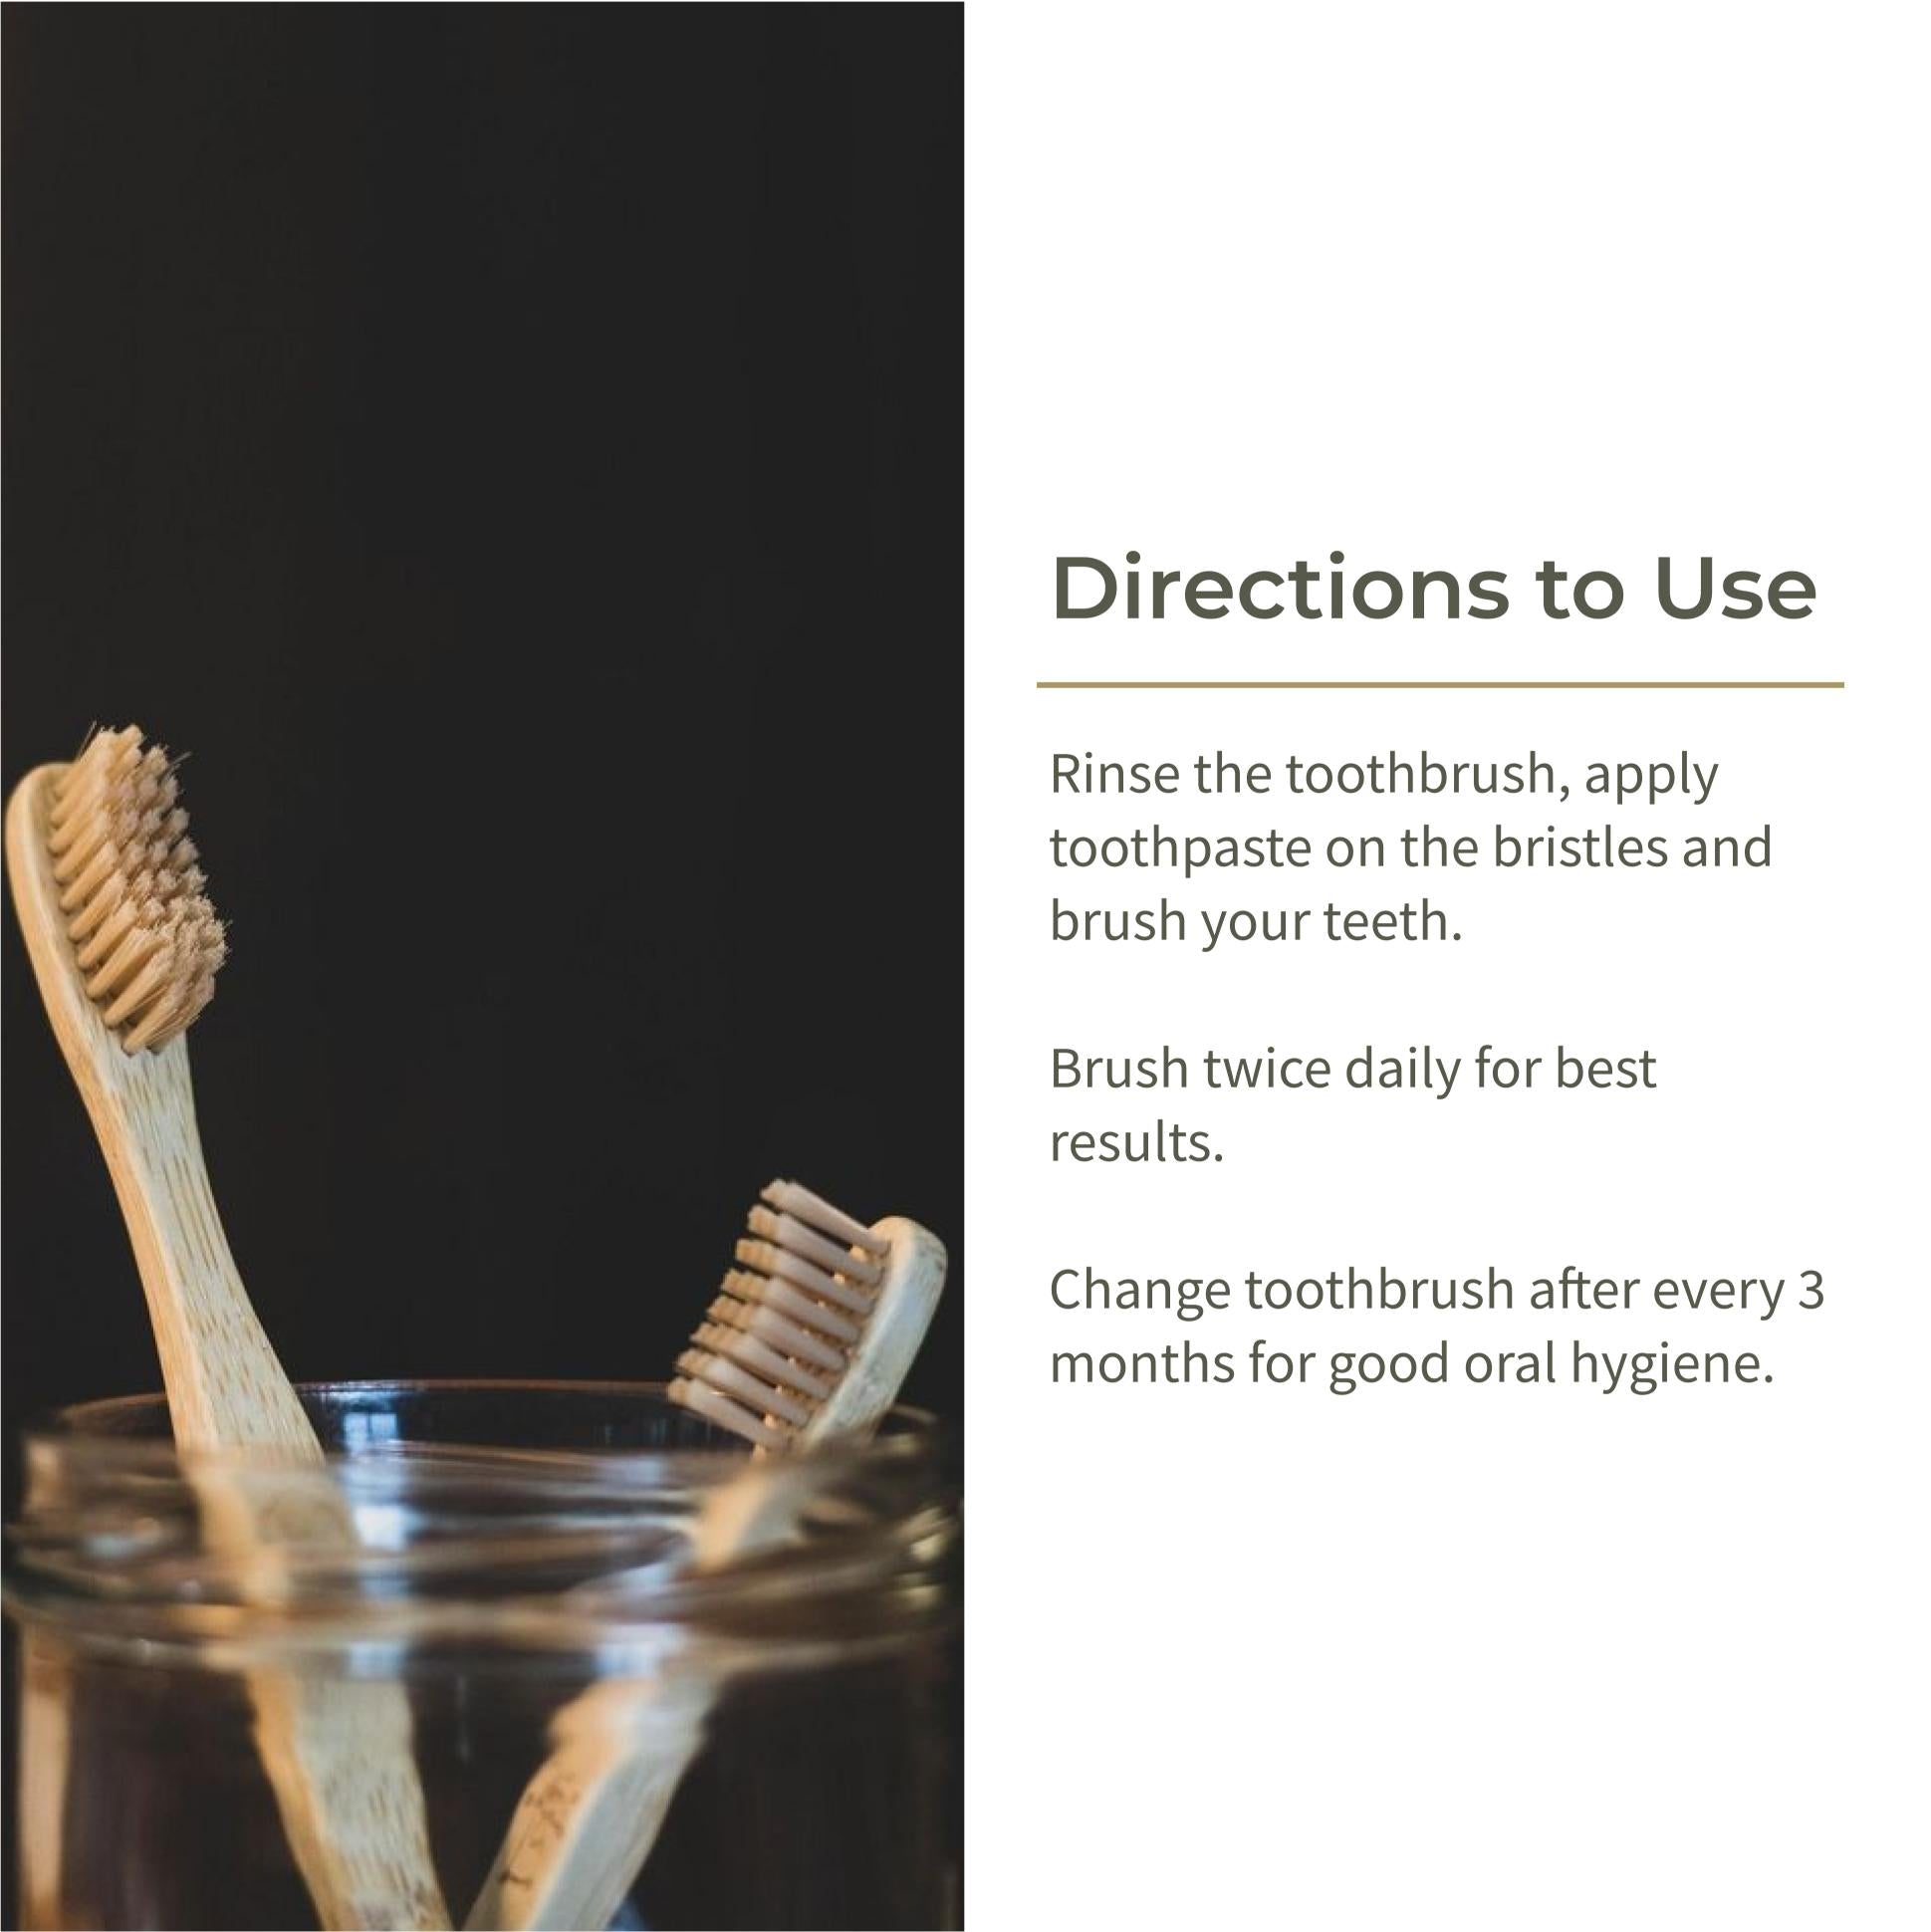 Ecotyl Bamboo Tooth Brush | Ultra Soft Bristles | Thorough Cleaning | Set of 4